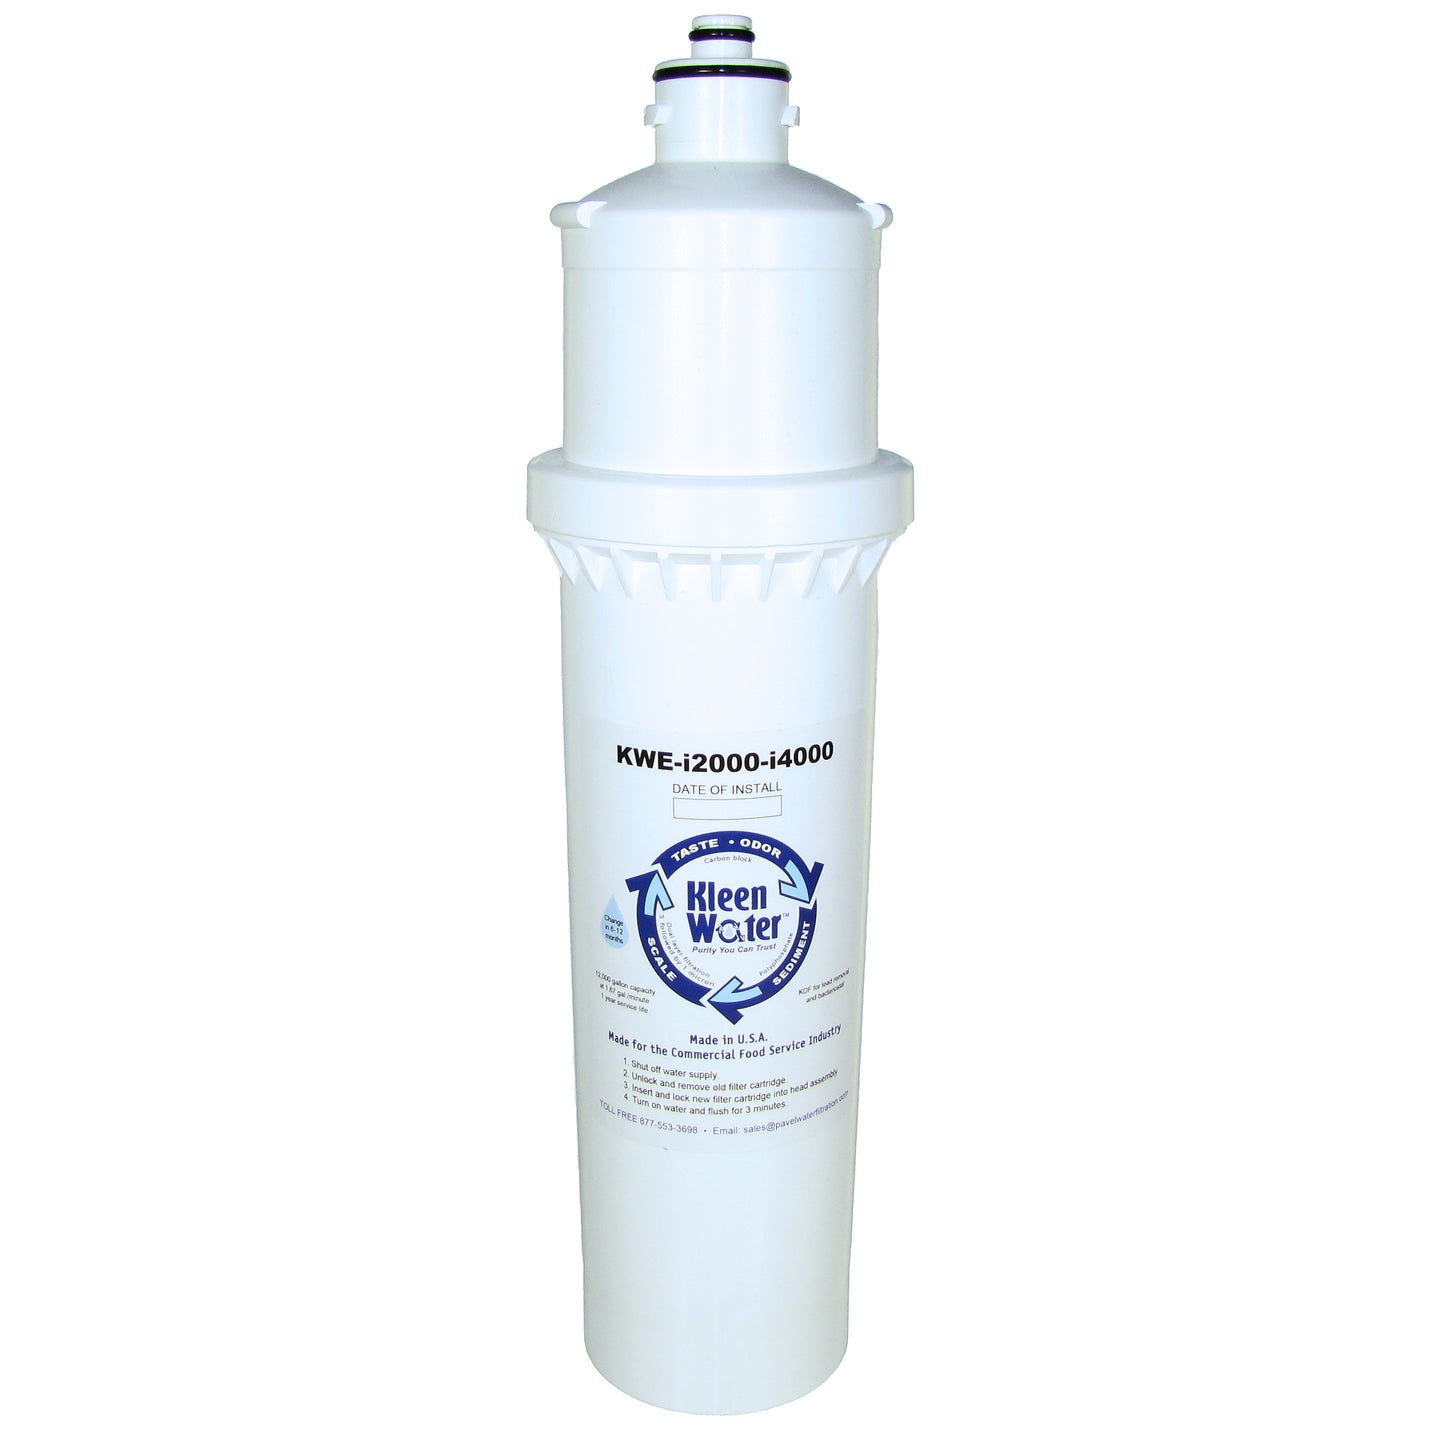 CFS Series Replacement Water Filter KWE-5M-KDF-P by KleenWater